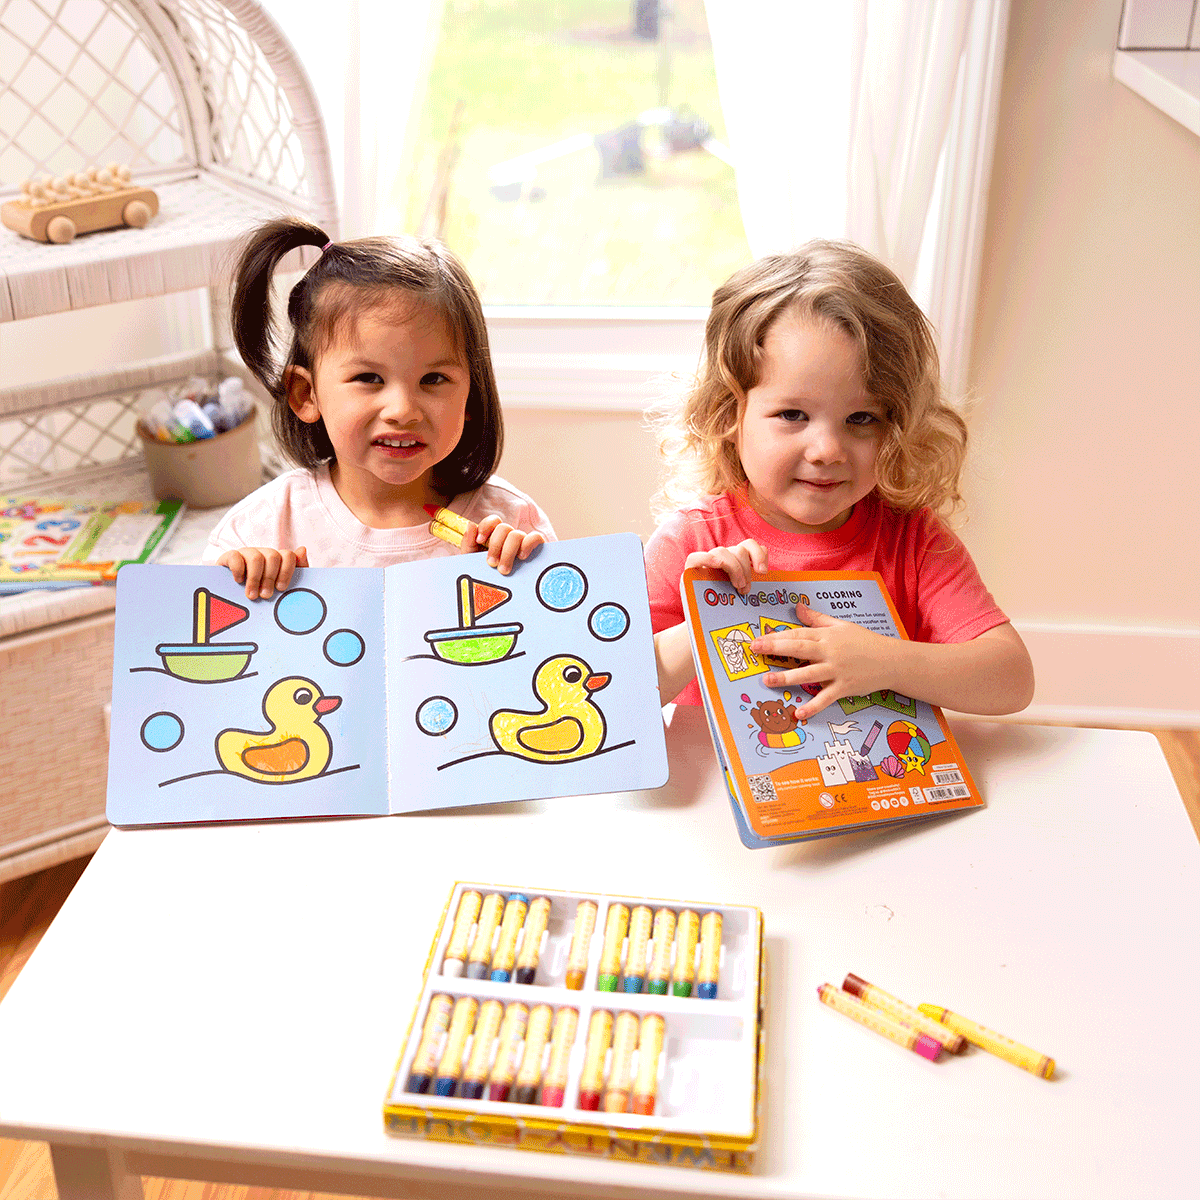 Two kids coloring with Our Day copy coloring book